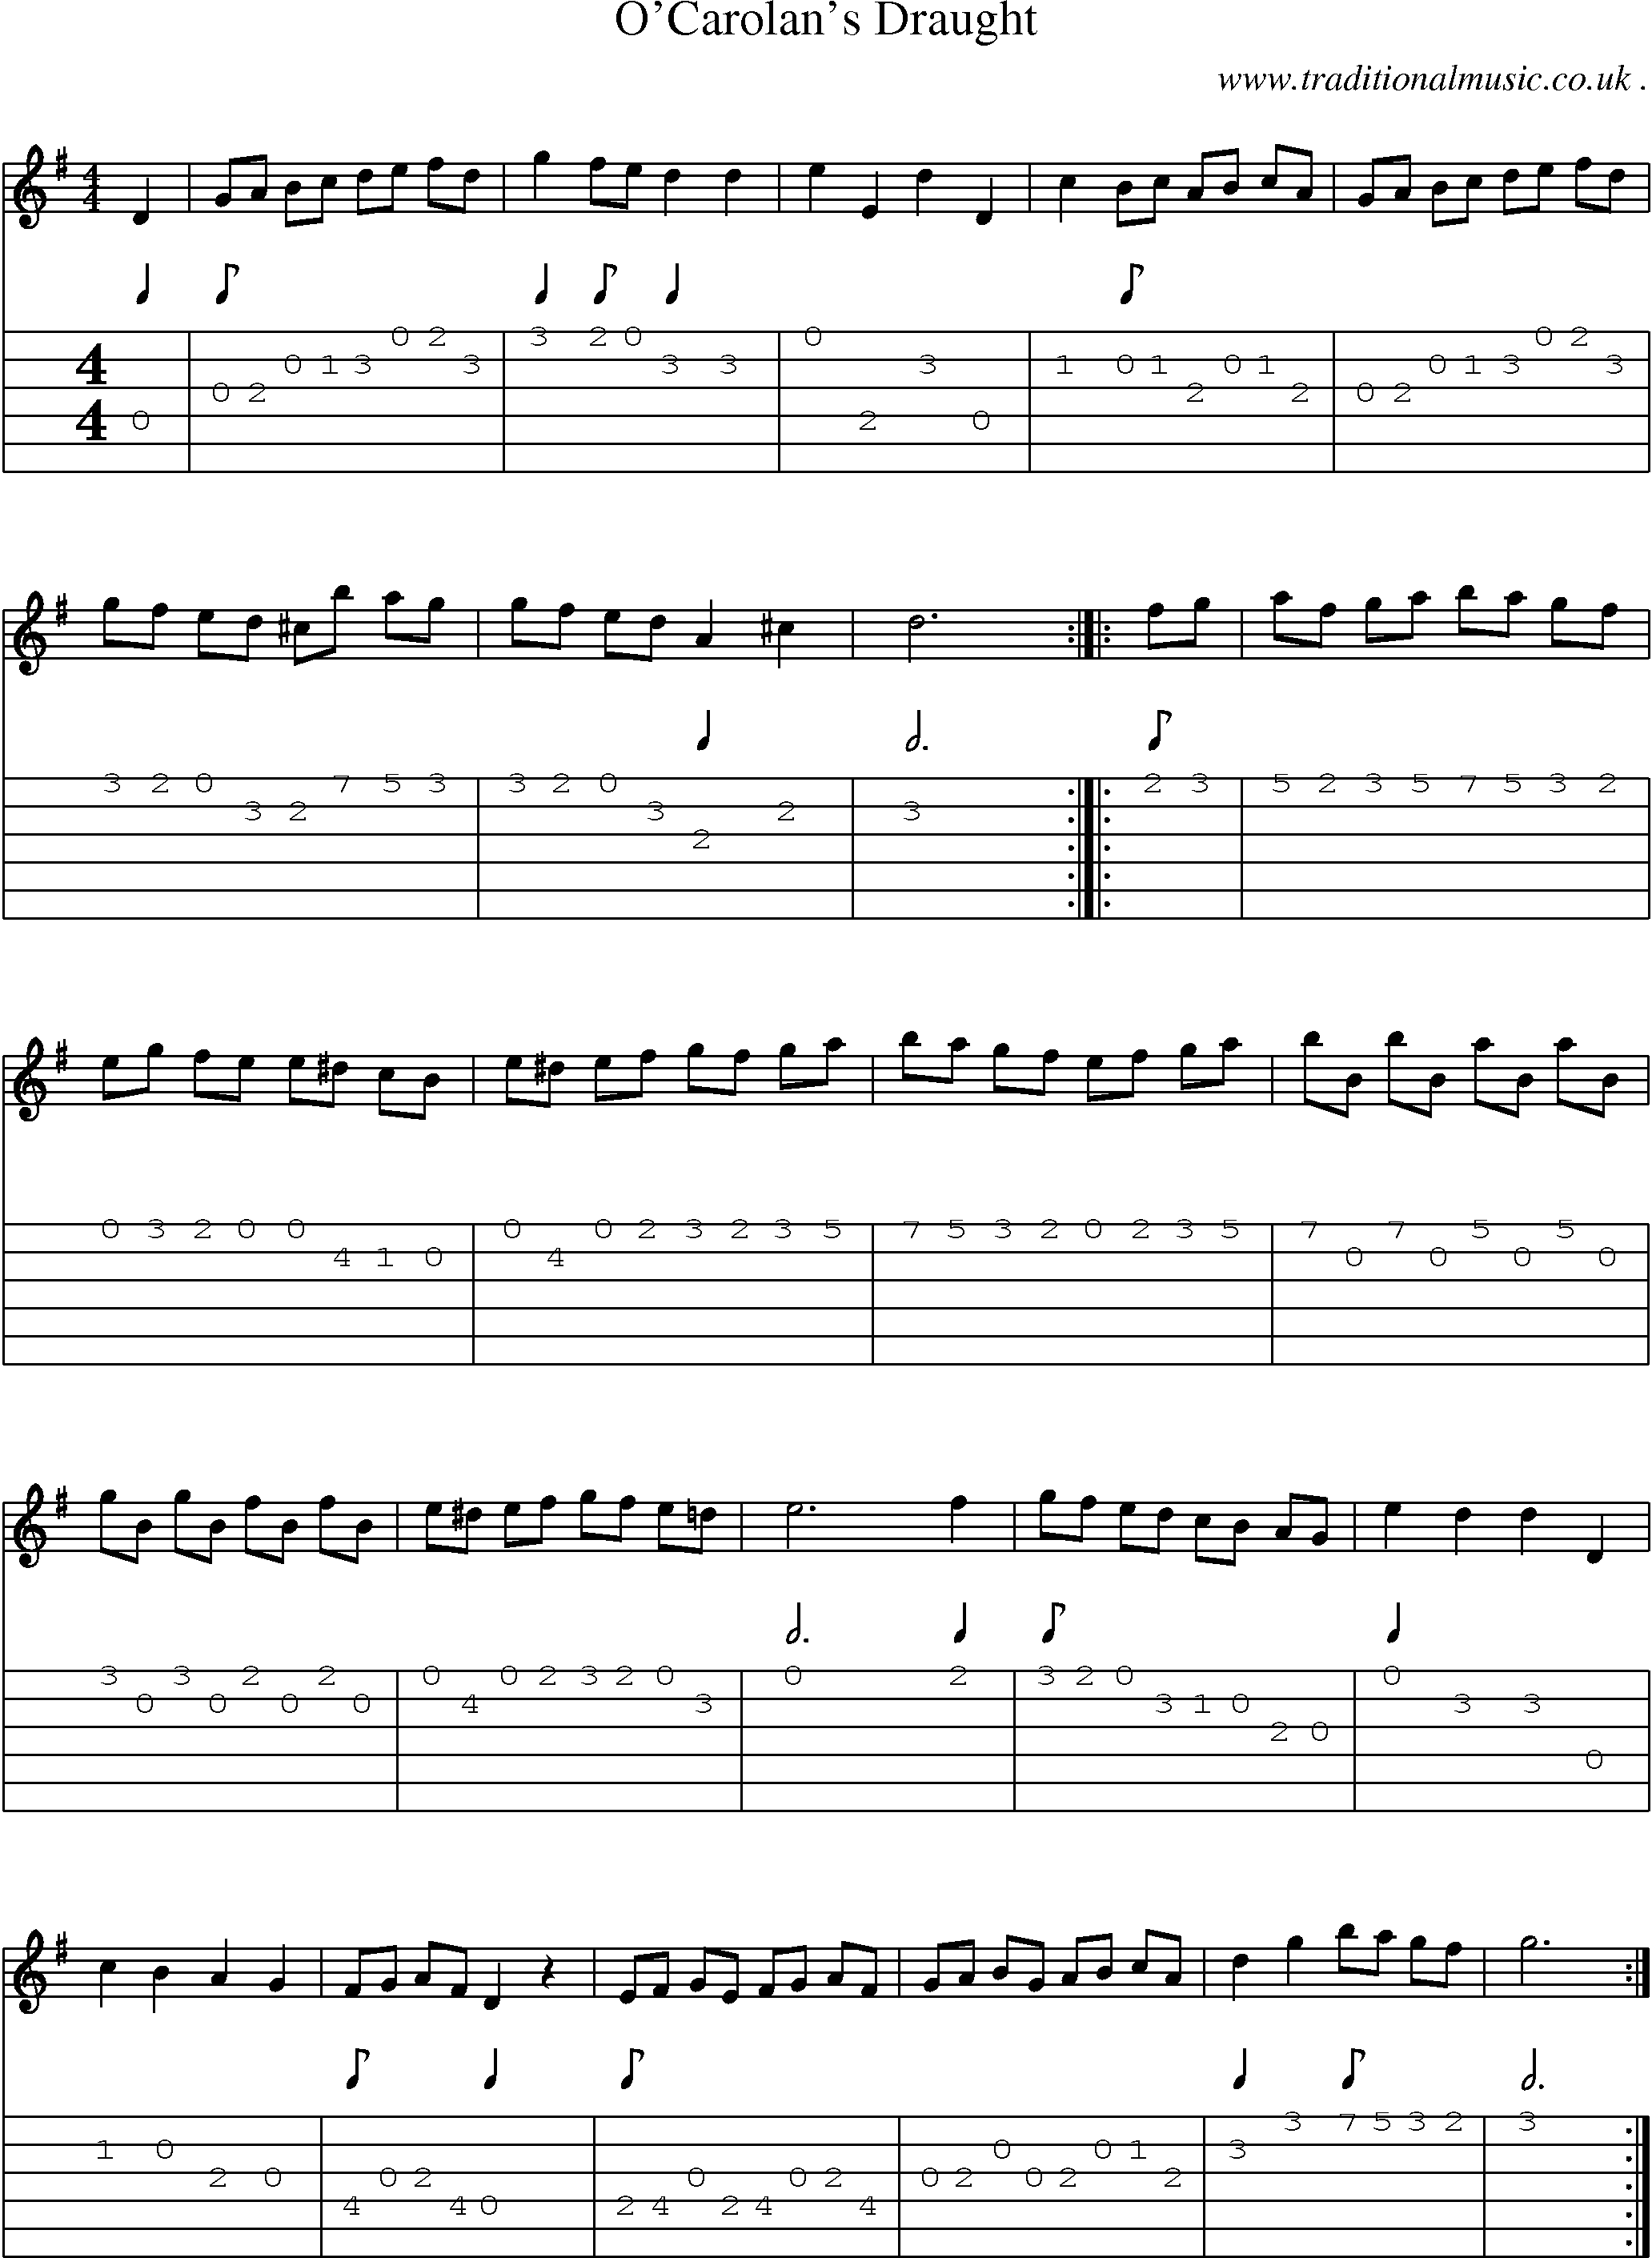 Sheet-Music and Guitar Tabs for Ocarolans Draught